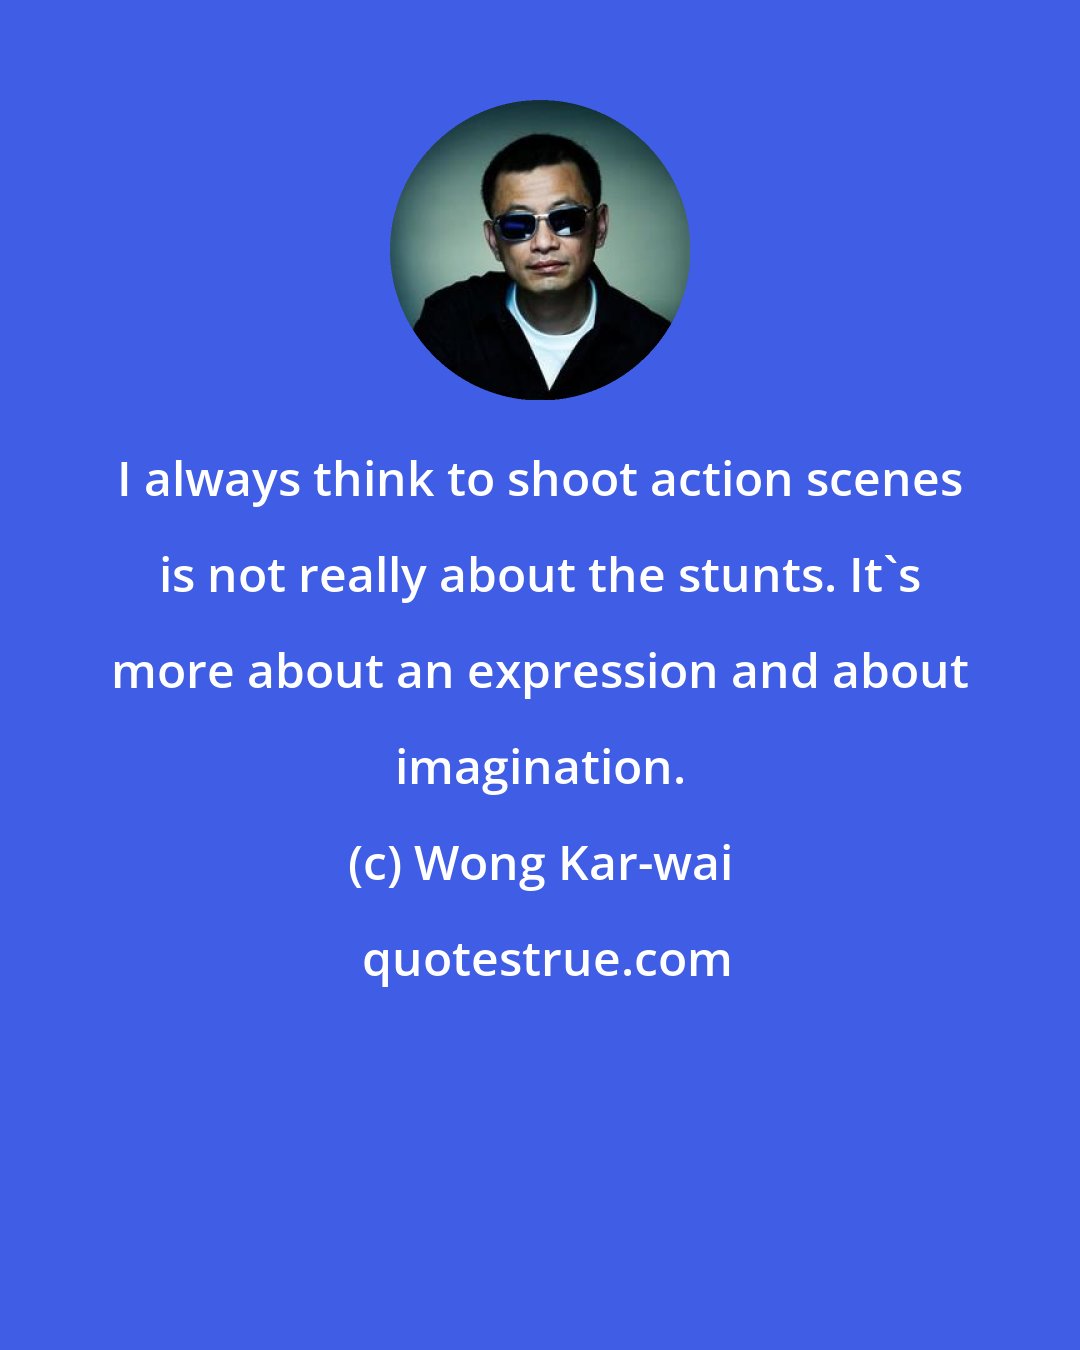 Wong Kar-wai: I always think to shoot action scenes is not really about the stunts. It's more about an expression and about imagination.